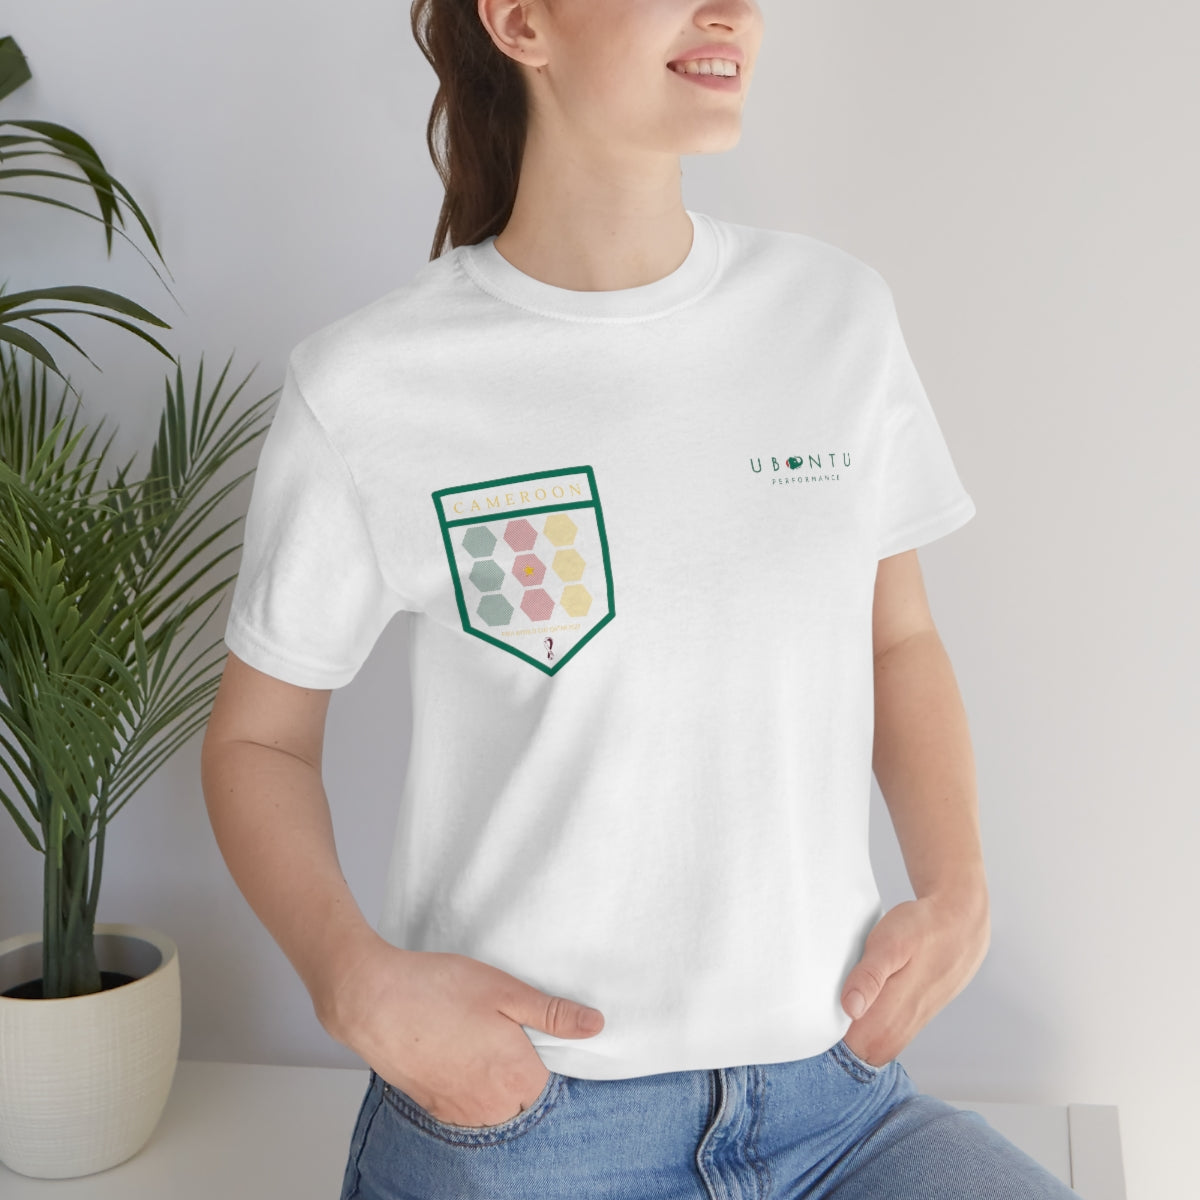 Cameroon flag colors men's  women's unisex tee soccer football fans gift world cup tee